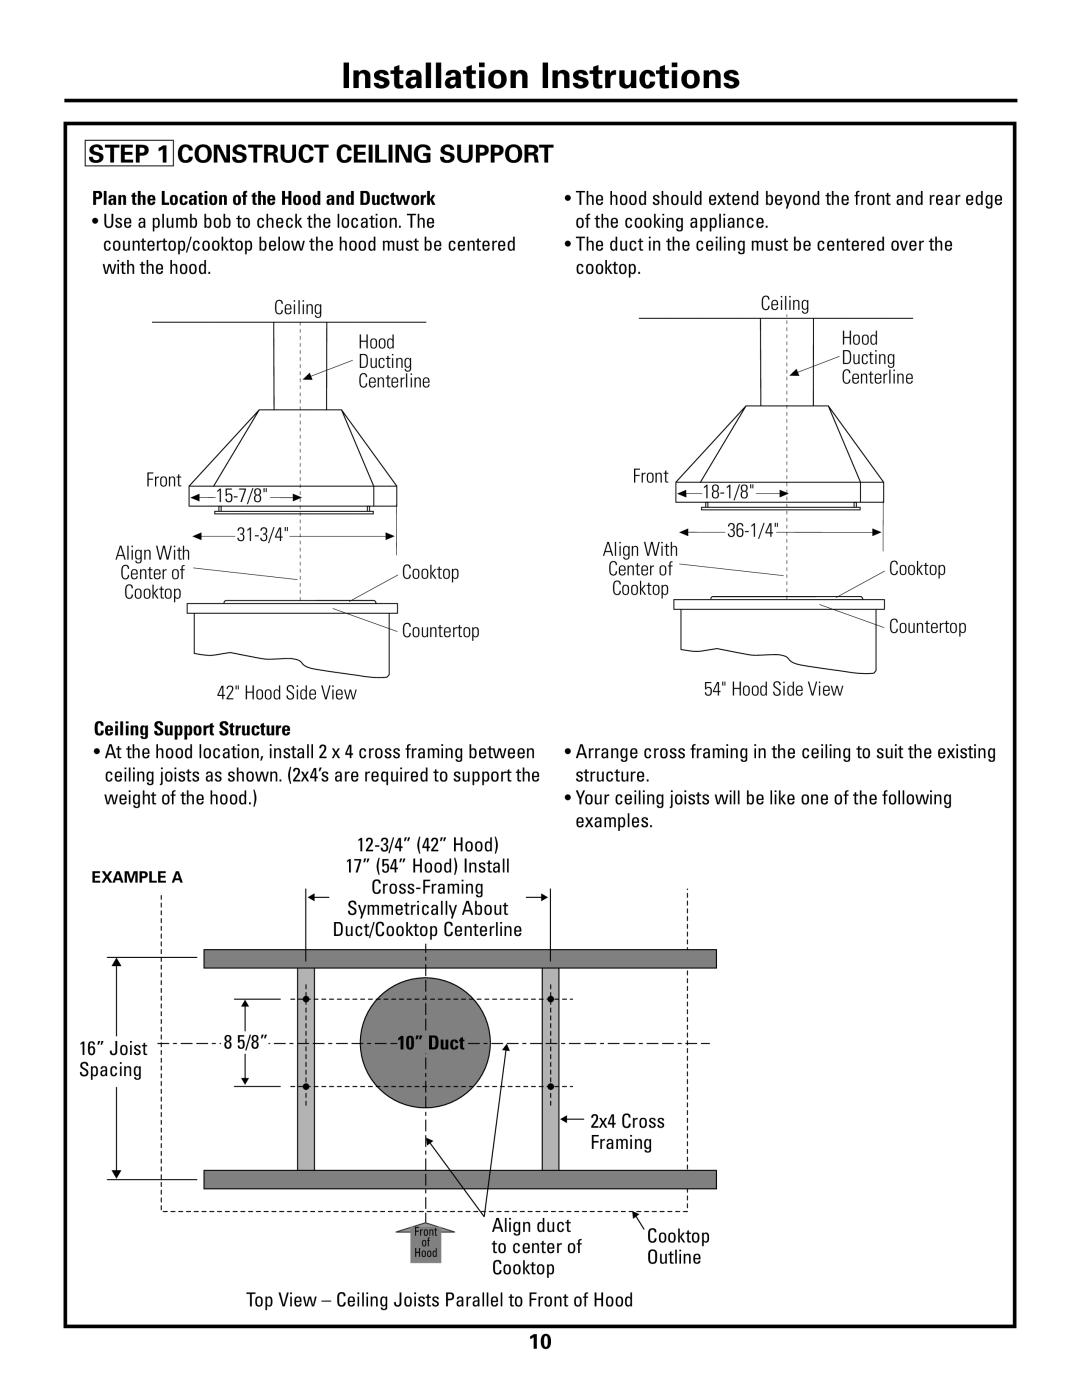 GE ZV541, ZV421 Construct Ceiling Support, Plan the Location of the Hood and Ductwork, Installation Instructions 